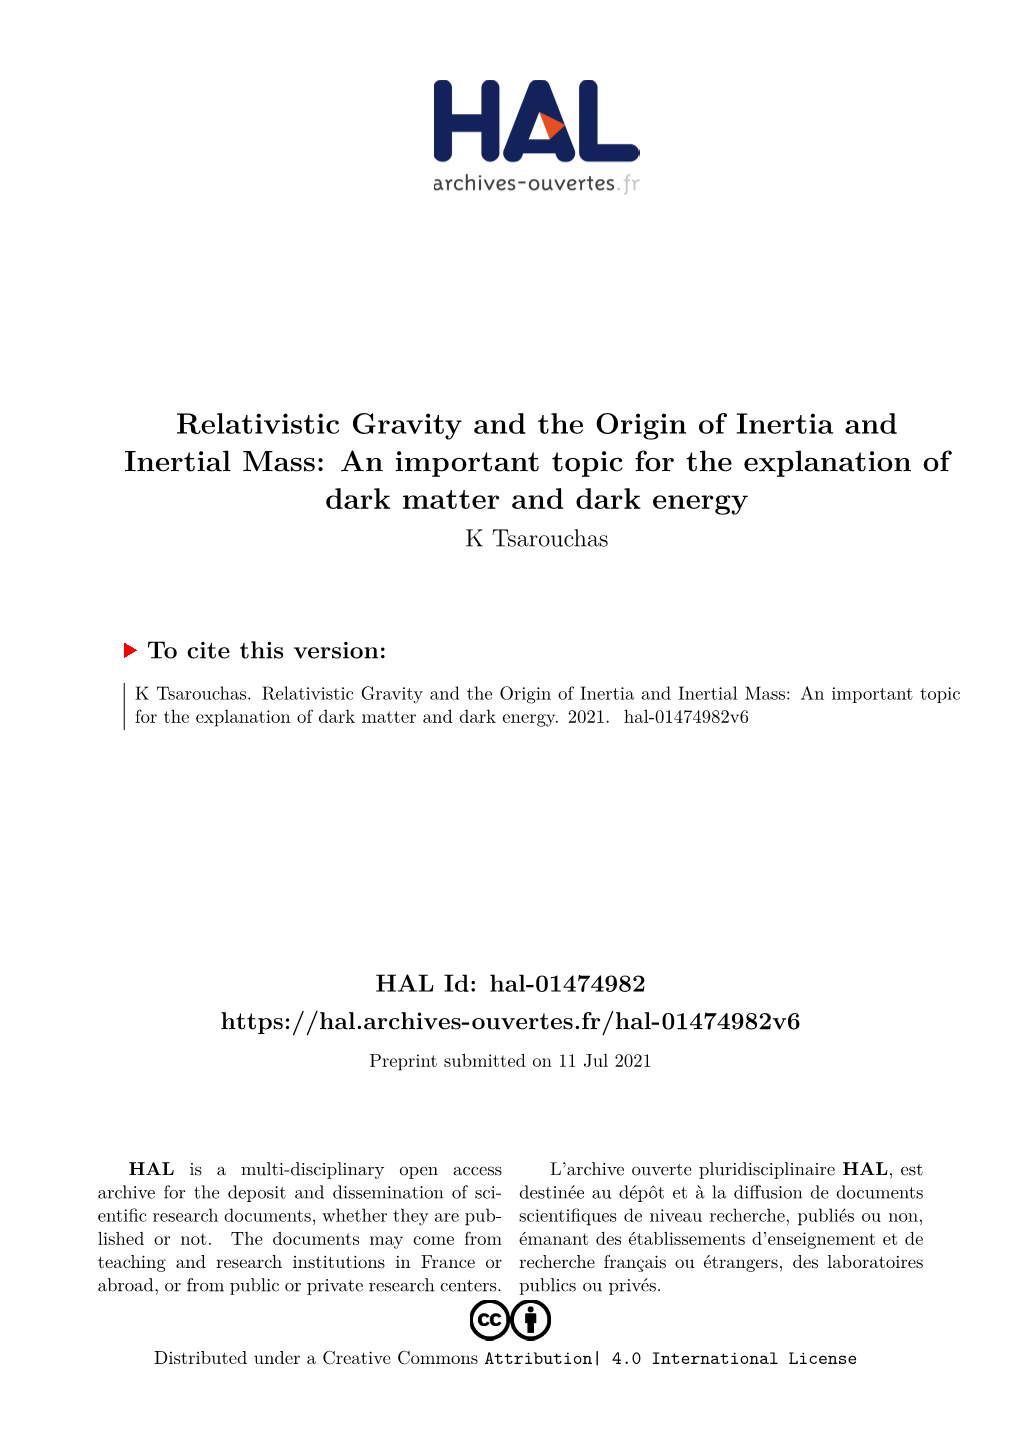 Relativistic Gravity and the Origin of Inertia and Inertial Mass: an Important Topic for the Explanation of Dark Matter and Dark Energy K Tsarouchas